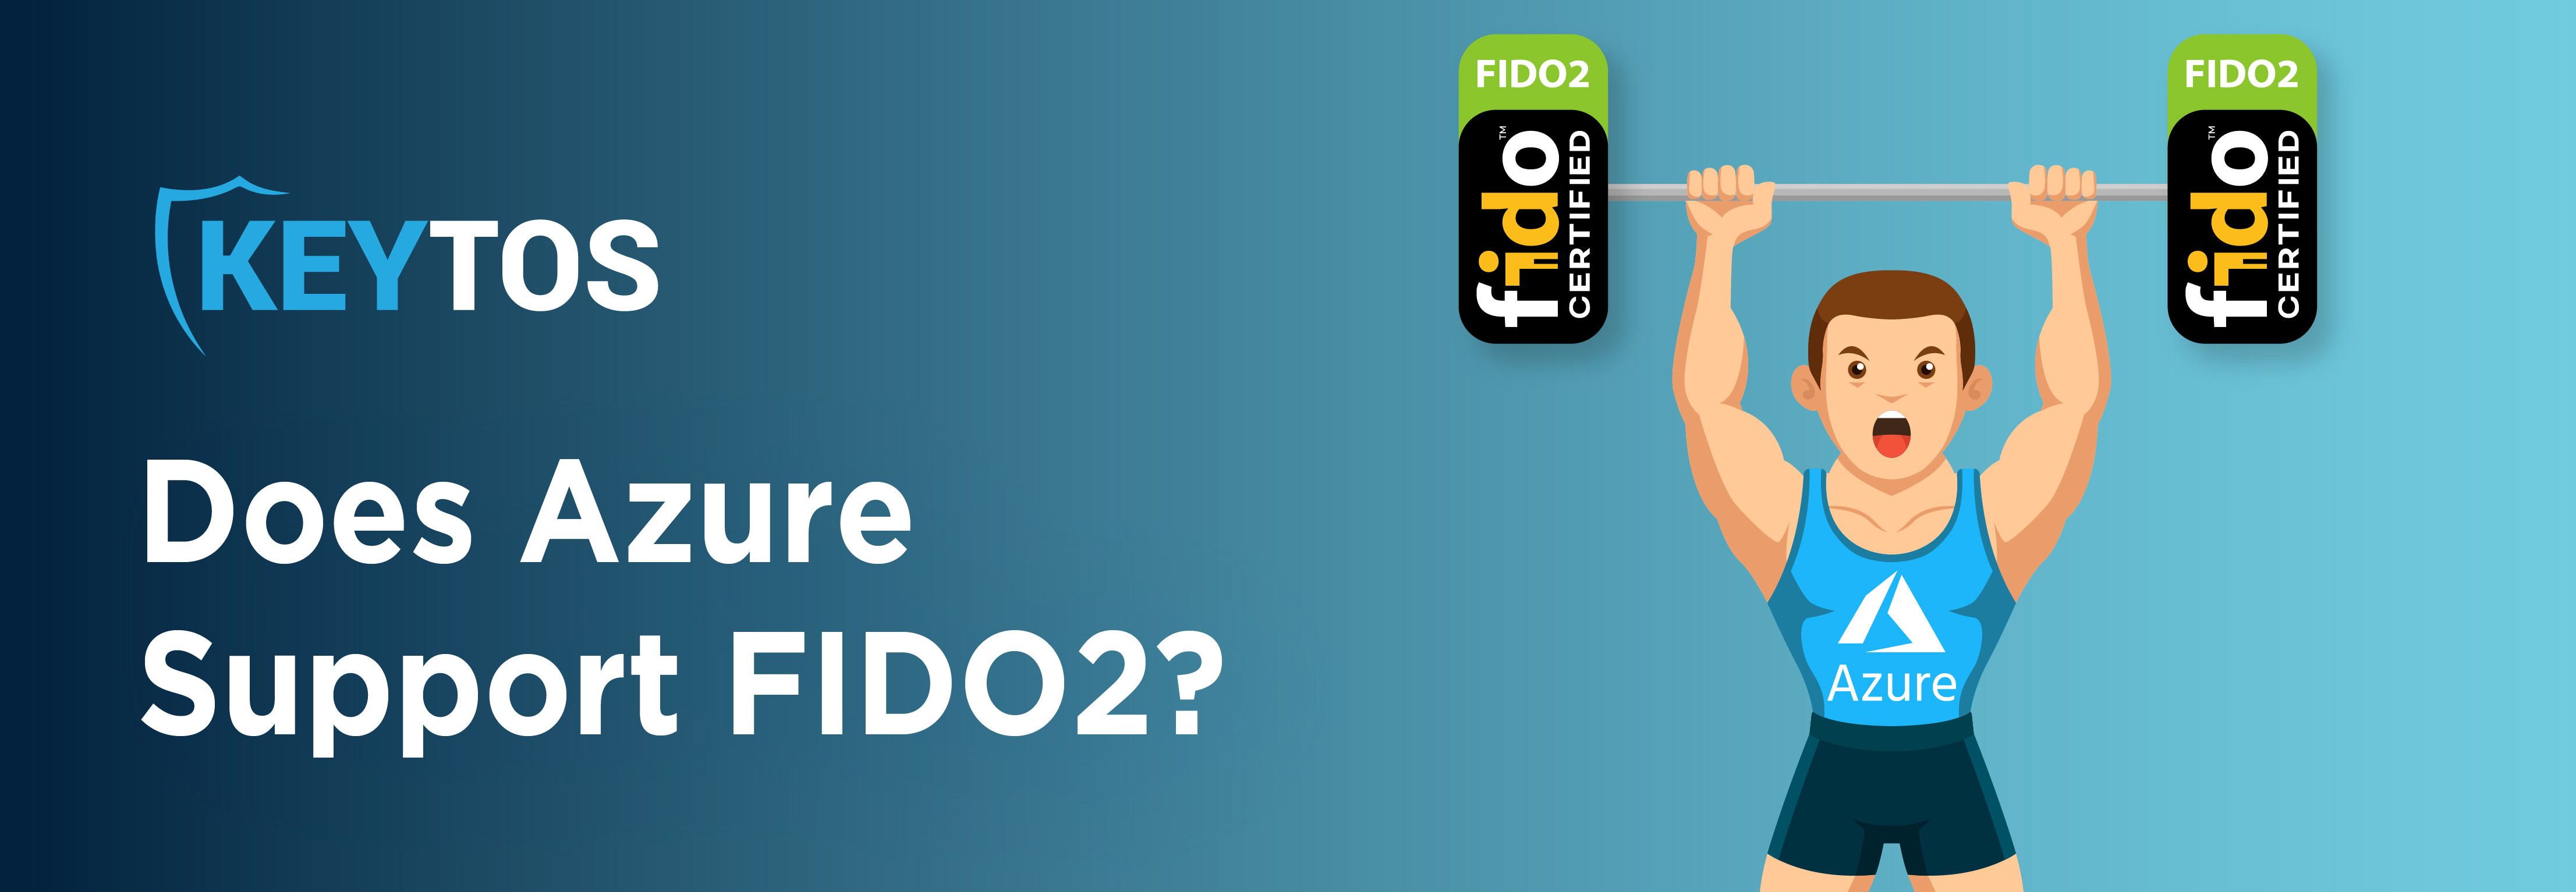 Does Azure support FIDO2?